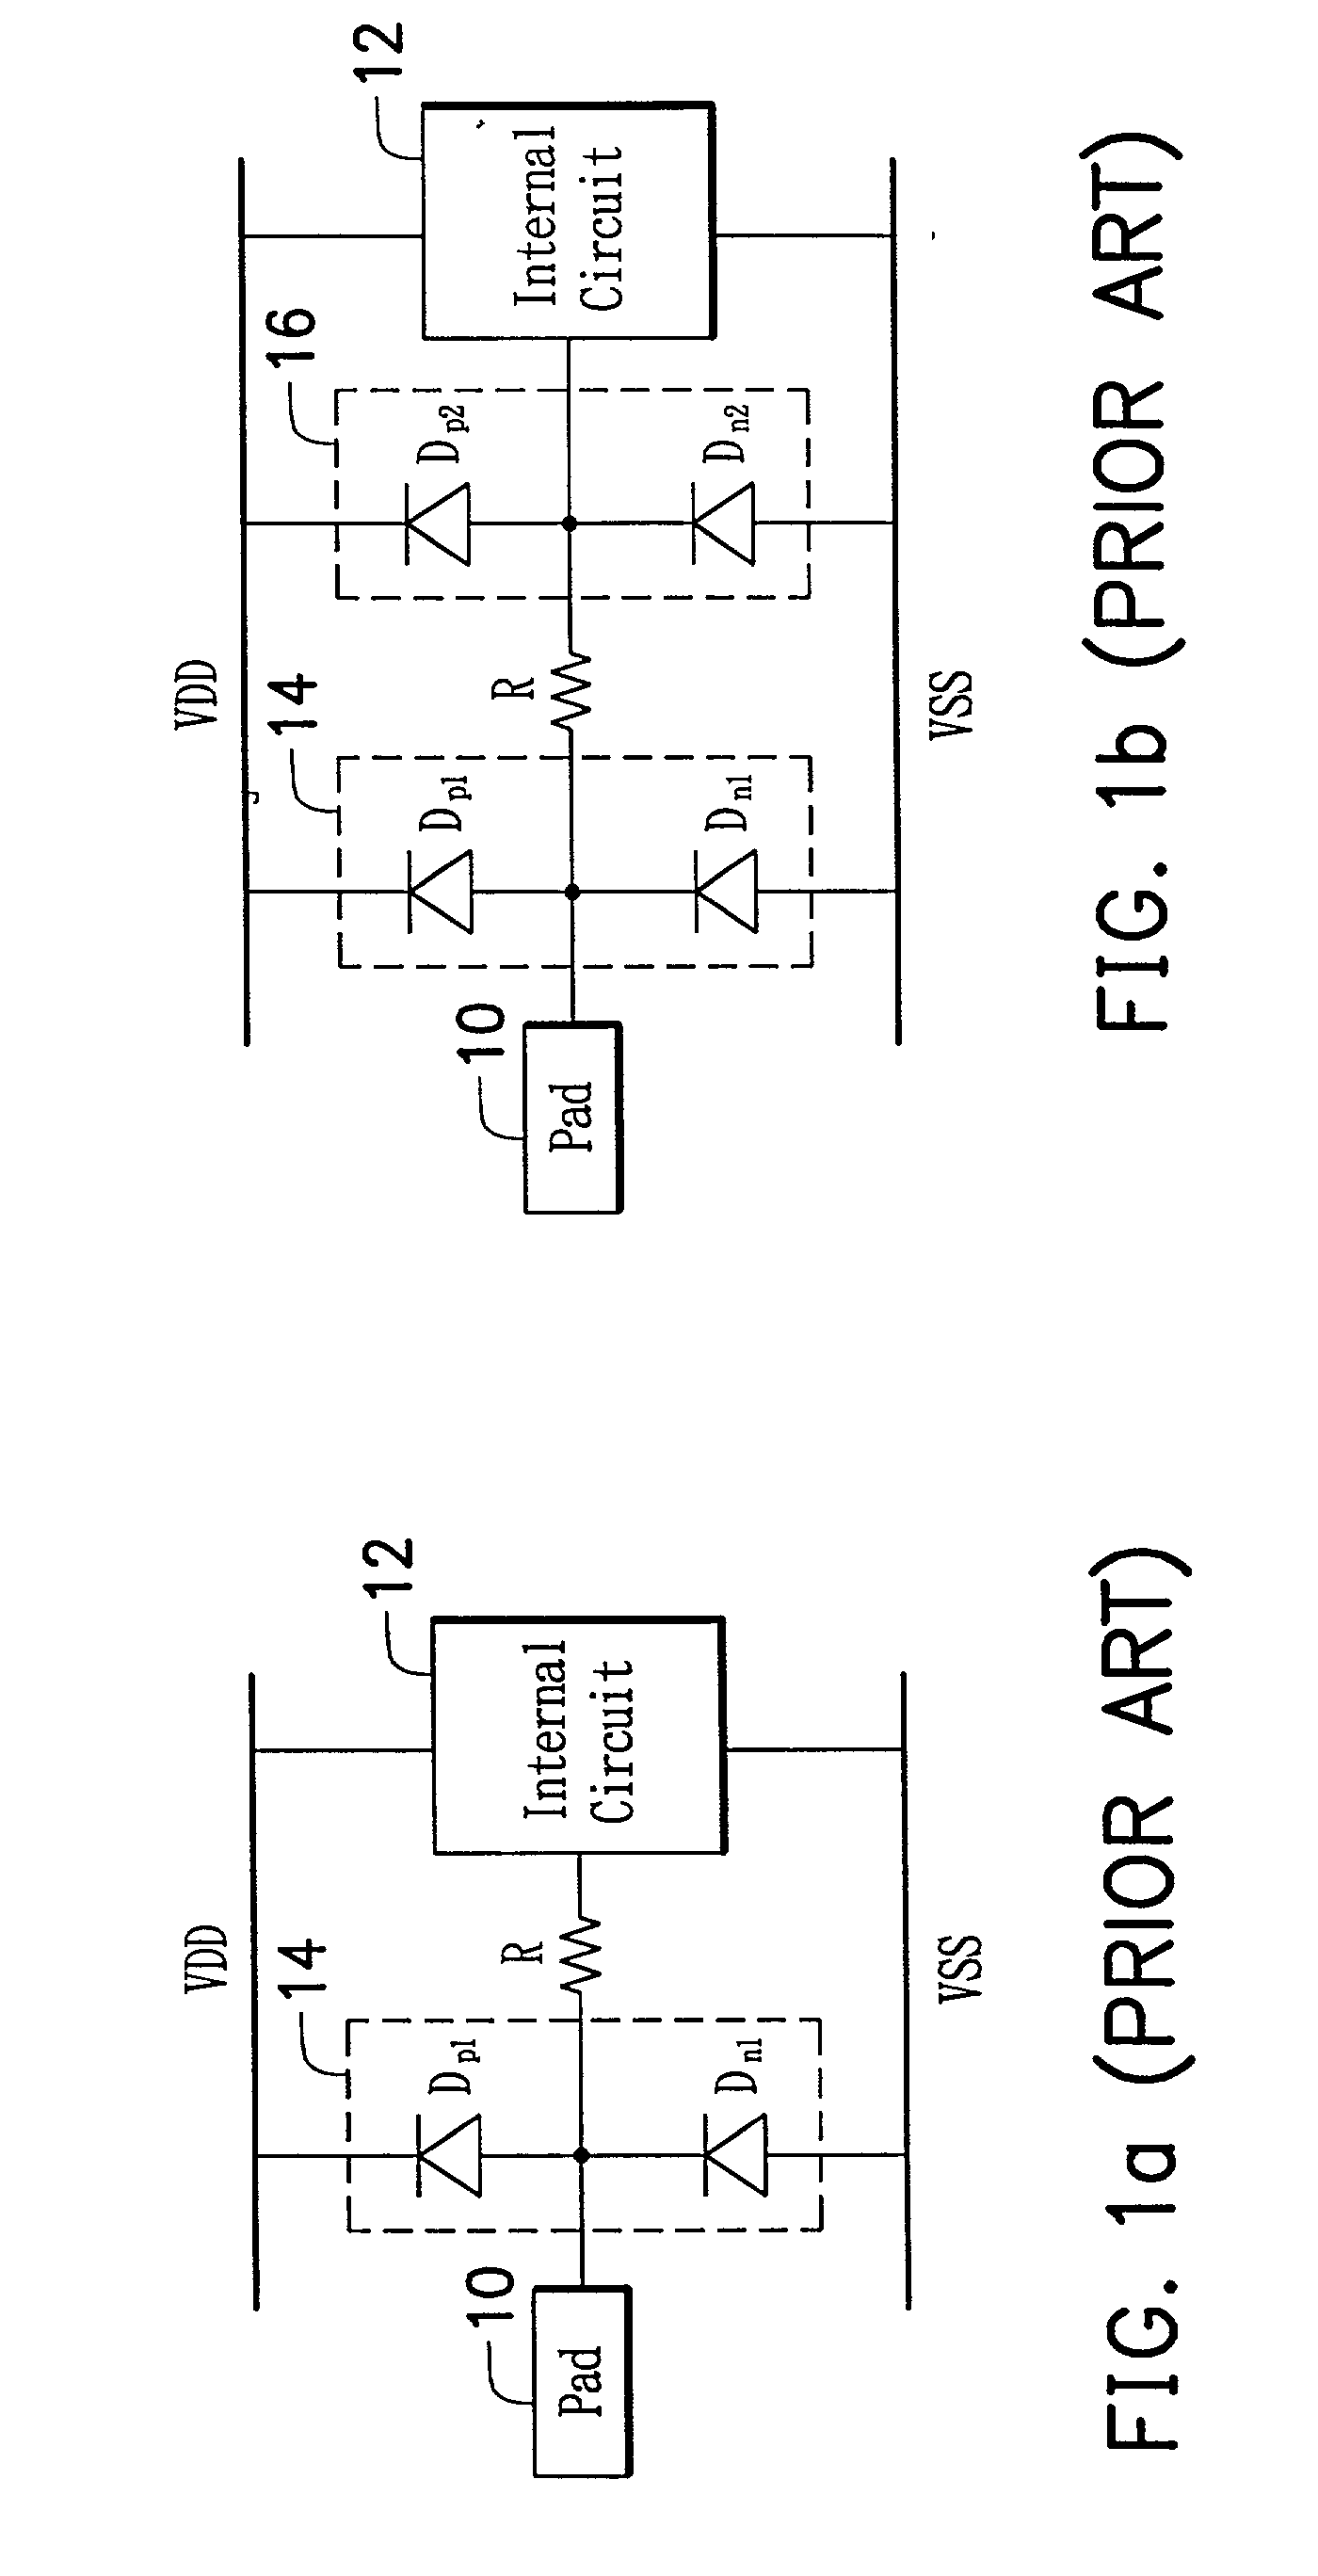 ESD protection circuit with very low input capacitance for high-frequency I/O ports